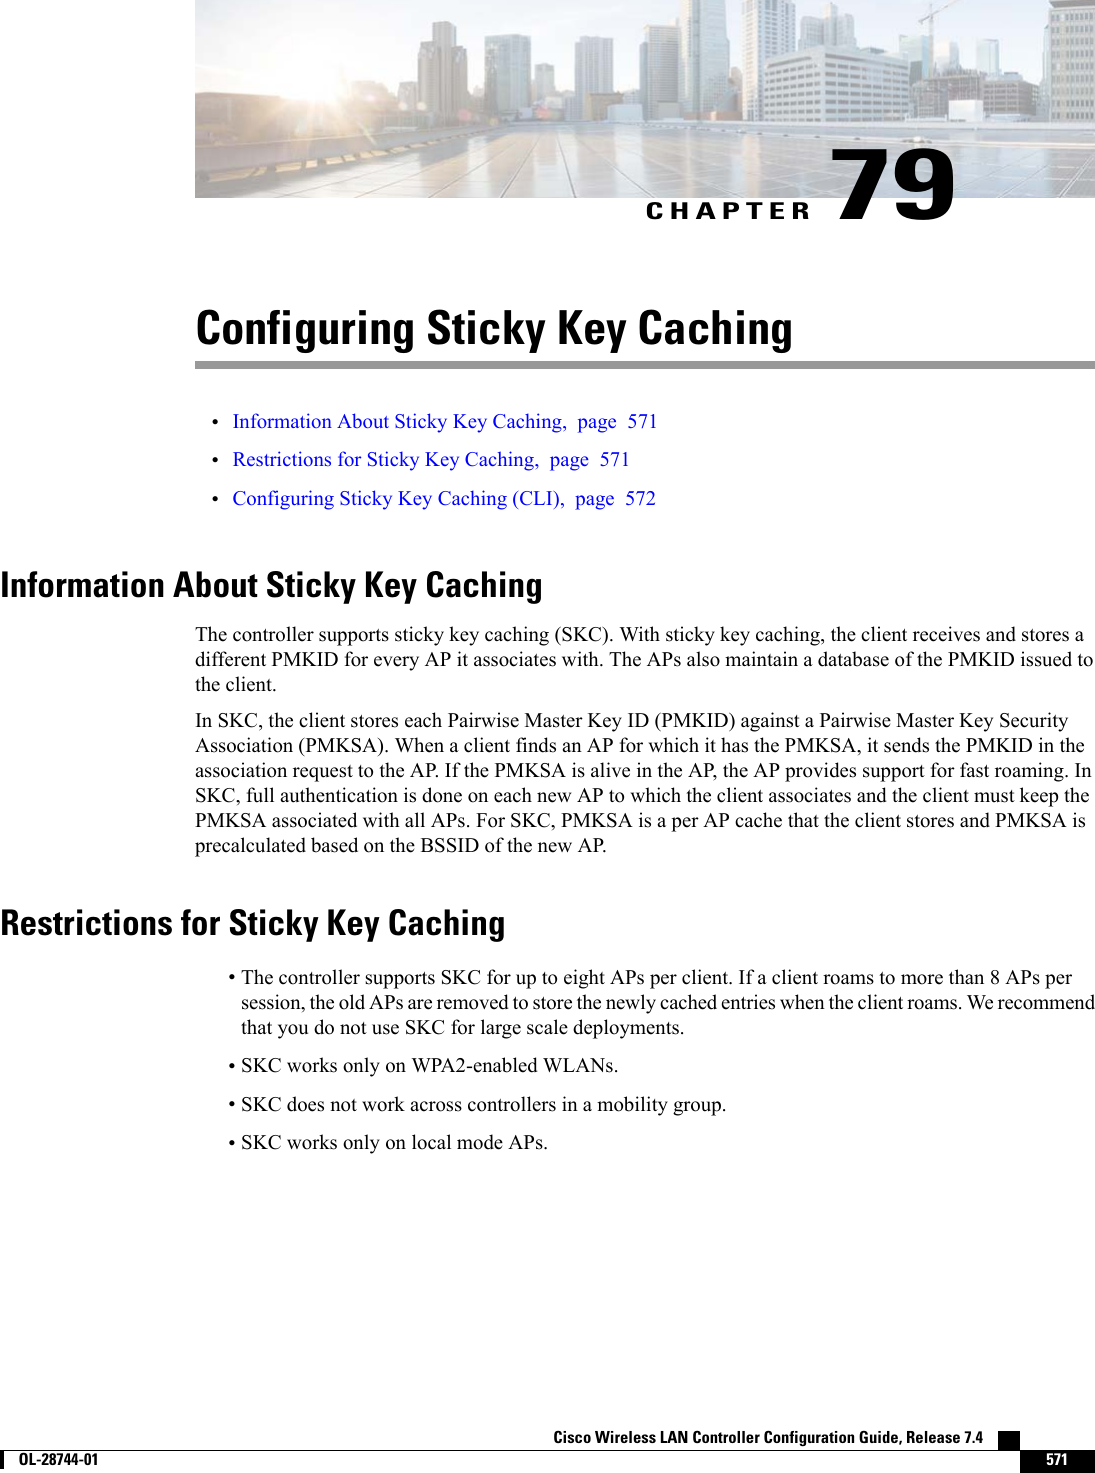 CHAPTER 79Configuring Sticky Key Caching•Information About Sticky Key Caching, page 571•Restrictions for Sticky Key Caching, page 571•Configuring Sticky Key Caching (CLI), page 572Information About Sticky Key CachingThe controller supports sticky key caching (SKC). With sticky key caching, the client receives and stores adifferent PMKID for every AP it associates with. The APs also maintain a database of the PMKID issued tothe client.In SKC, the client stores each Pairwise Master Key ID (PMKID) against a Pairwise Master Key SecurityAssociation (PMKSA). When a client finds an AP for which it has the PMKSA, it sends the PMKID in theassociation request to the AP. If the PMKSA is alive in the AP, the AP provides support for fast roaming. InSKC, full authentication is done on each new AP to which the client associates and the client must keep thePMKSA associated with all APs. For SKC, PMKSA is a per AP cache that the client stores and PMKSA isprecalculated based on the BSSID of the new AP.Restrictions for Sticky Key Caching•The controller supports SKC for up to eight APs per client. If a client roams to more than 8 APs persession, the old APs are removed to store the newly cached entries when the client roams. We recommendthat you do not use SKC for large scale deployments.•SKC works only on WPA2-enabled WLANs.•SKC does not work across controllers in a mobility group.•SKC works only on local mode APs.Cisco Wireless LAN Controller Configuration Guide, Release 7.4        OL-28744-01 571